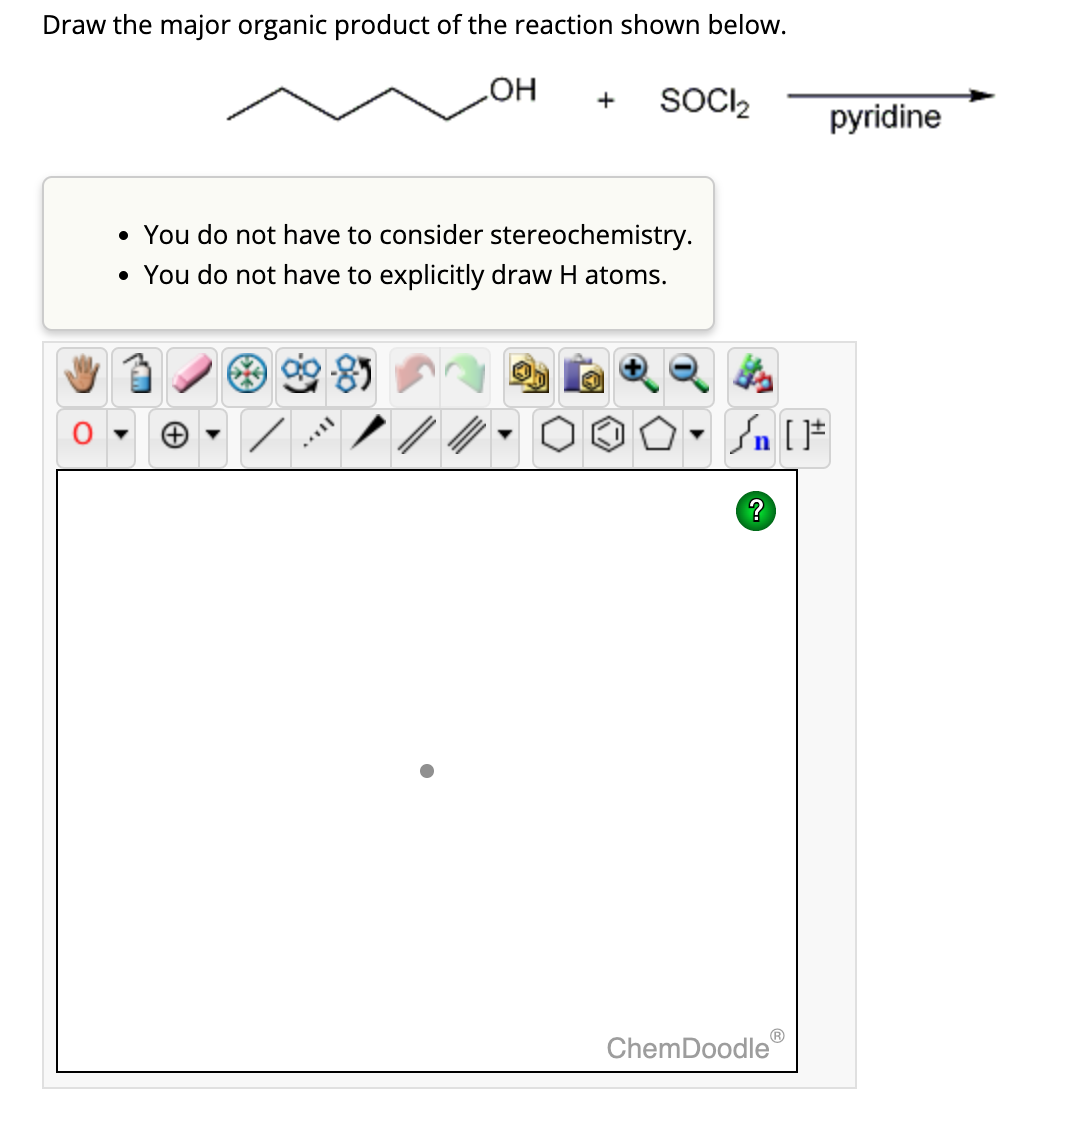 Draw the major organic product of the reaction shown below.
OH
+ SOCI₂
• You do not have to consider stereochemistry.
• You do not have to explicitly draw H atoms.
TAYY
- []
?
ChemDoodle
pyridine